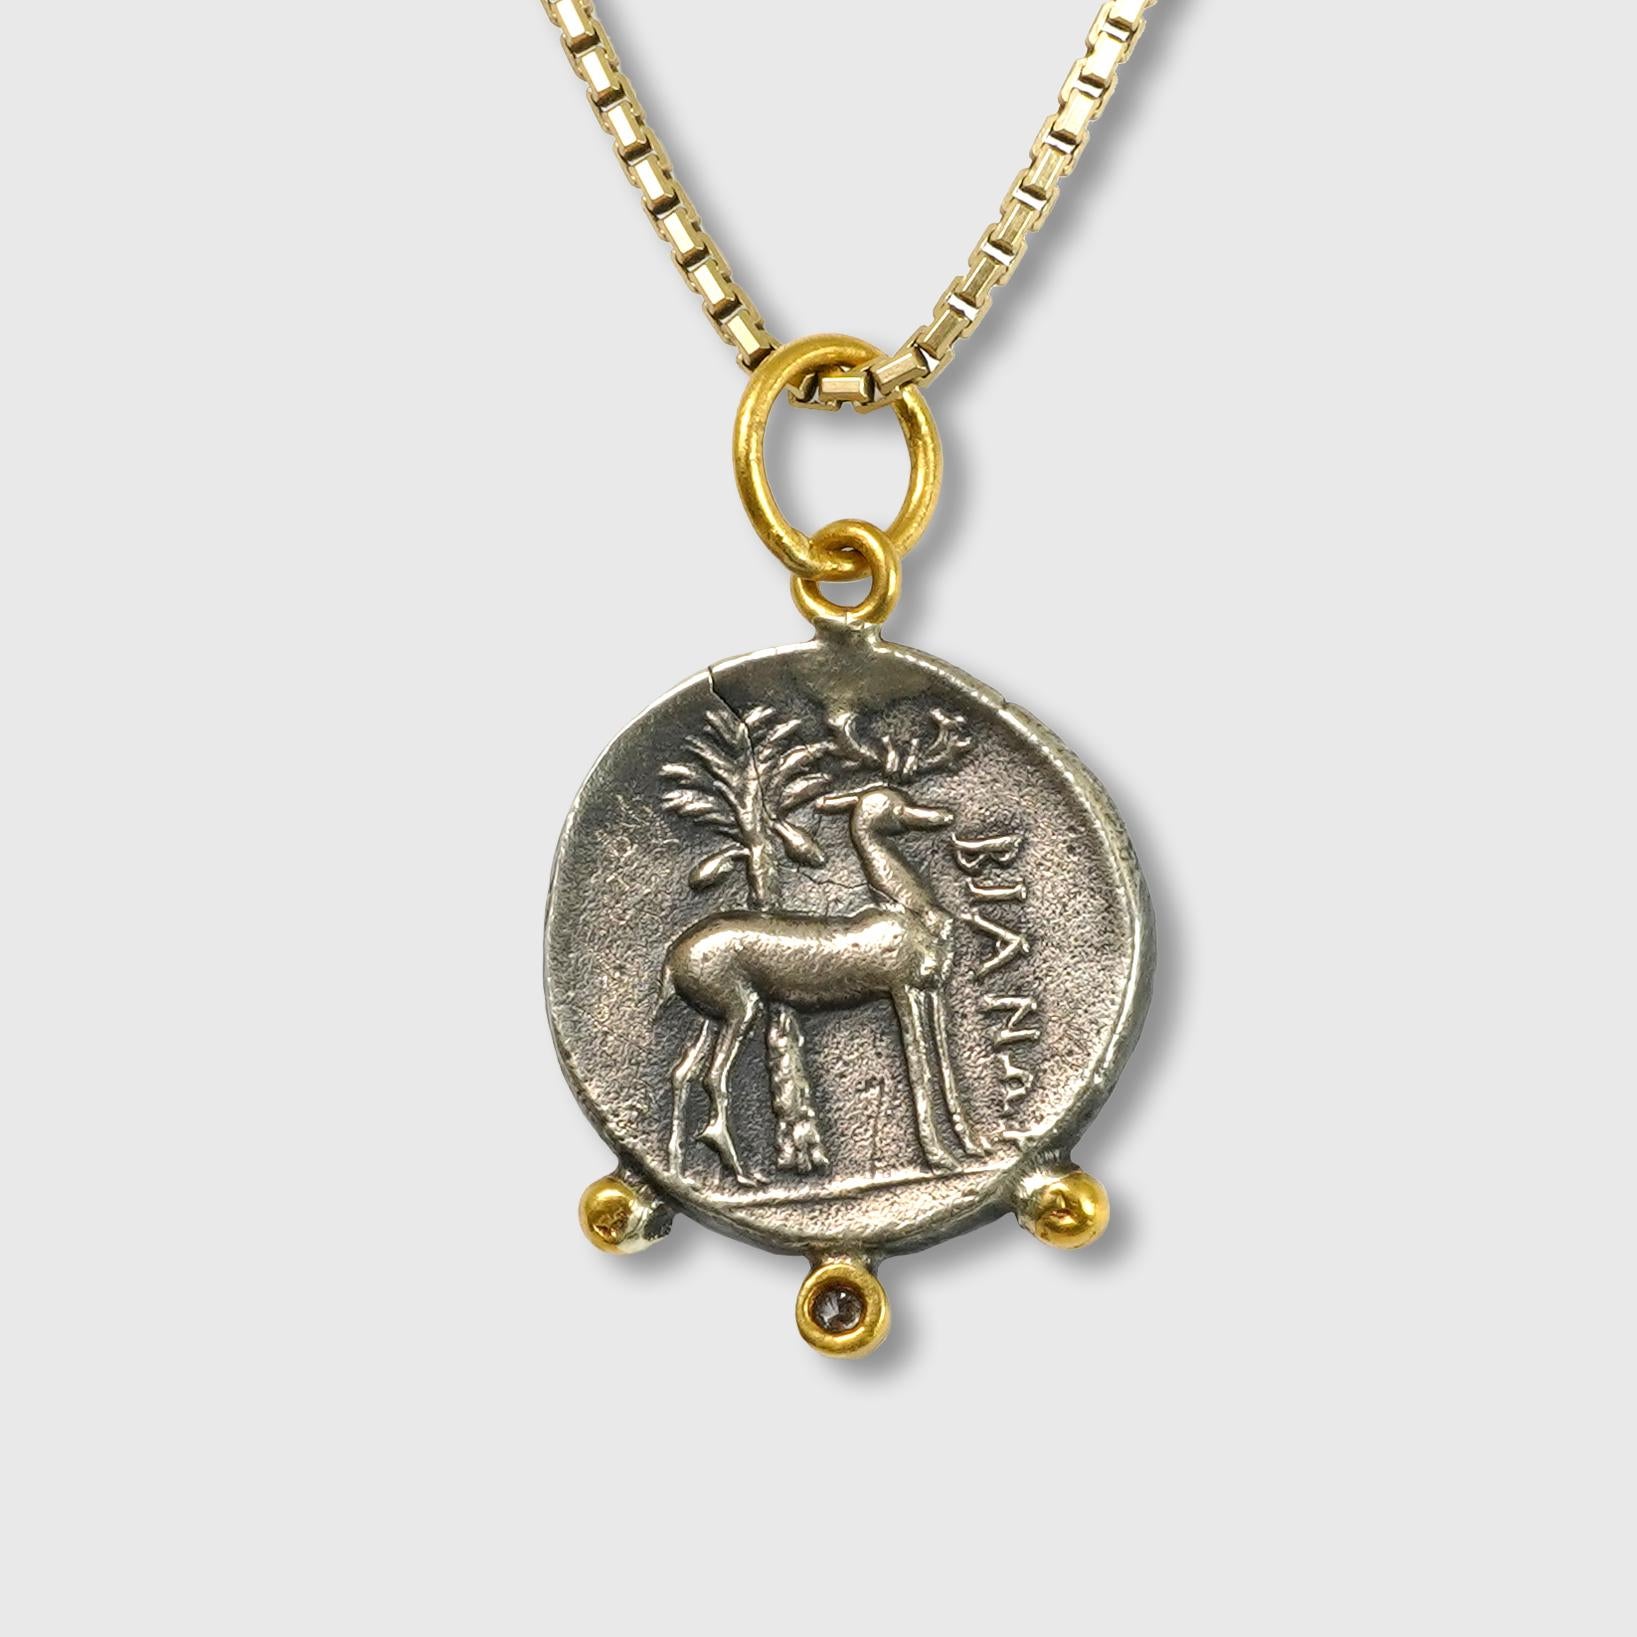 Ephesus, Queen Bee, Tetra Drachm, Charm Pendant, 24kt Yellow Gold, Silver & 0.02ct Diamonds.

Sterling Silver coin is a replica coin from those in the Turkish Museum. 390–380 B.C., Coin (tetradrachm) of Ephesos

3 Diamonds - 0.02cts
24kt Gold-0.65